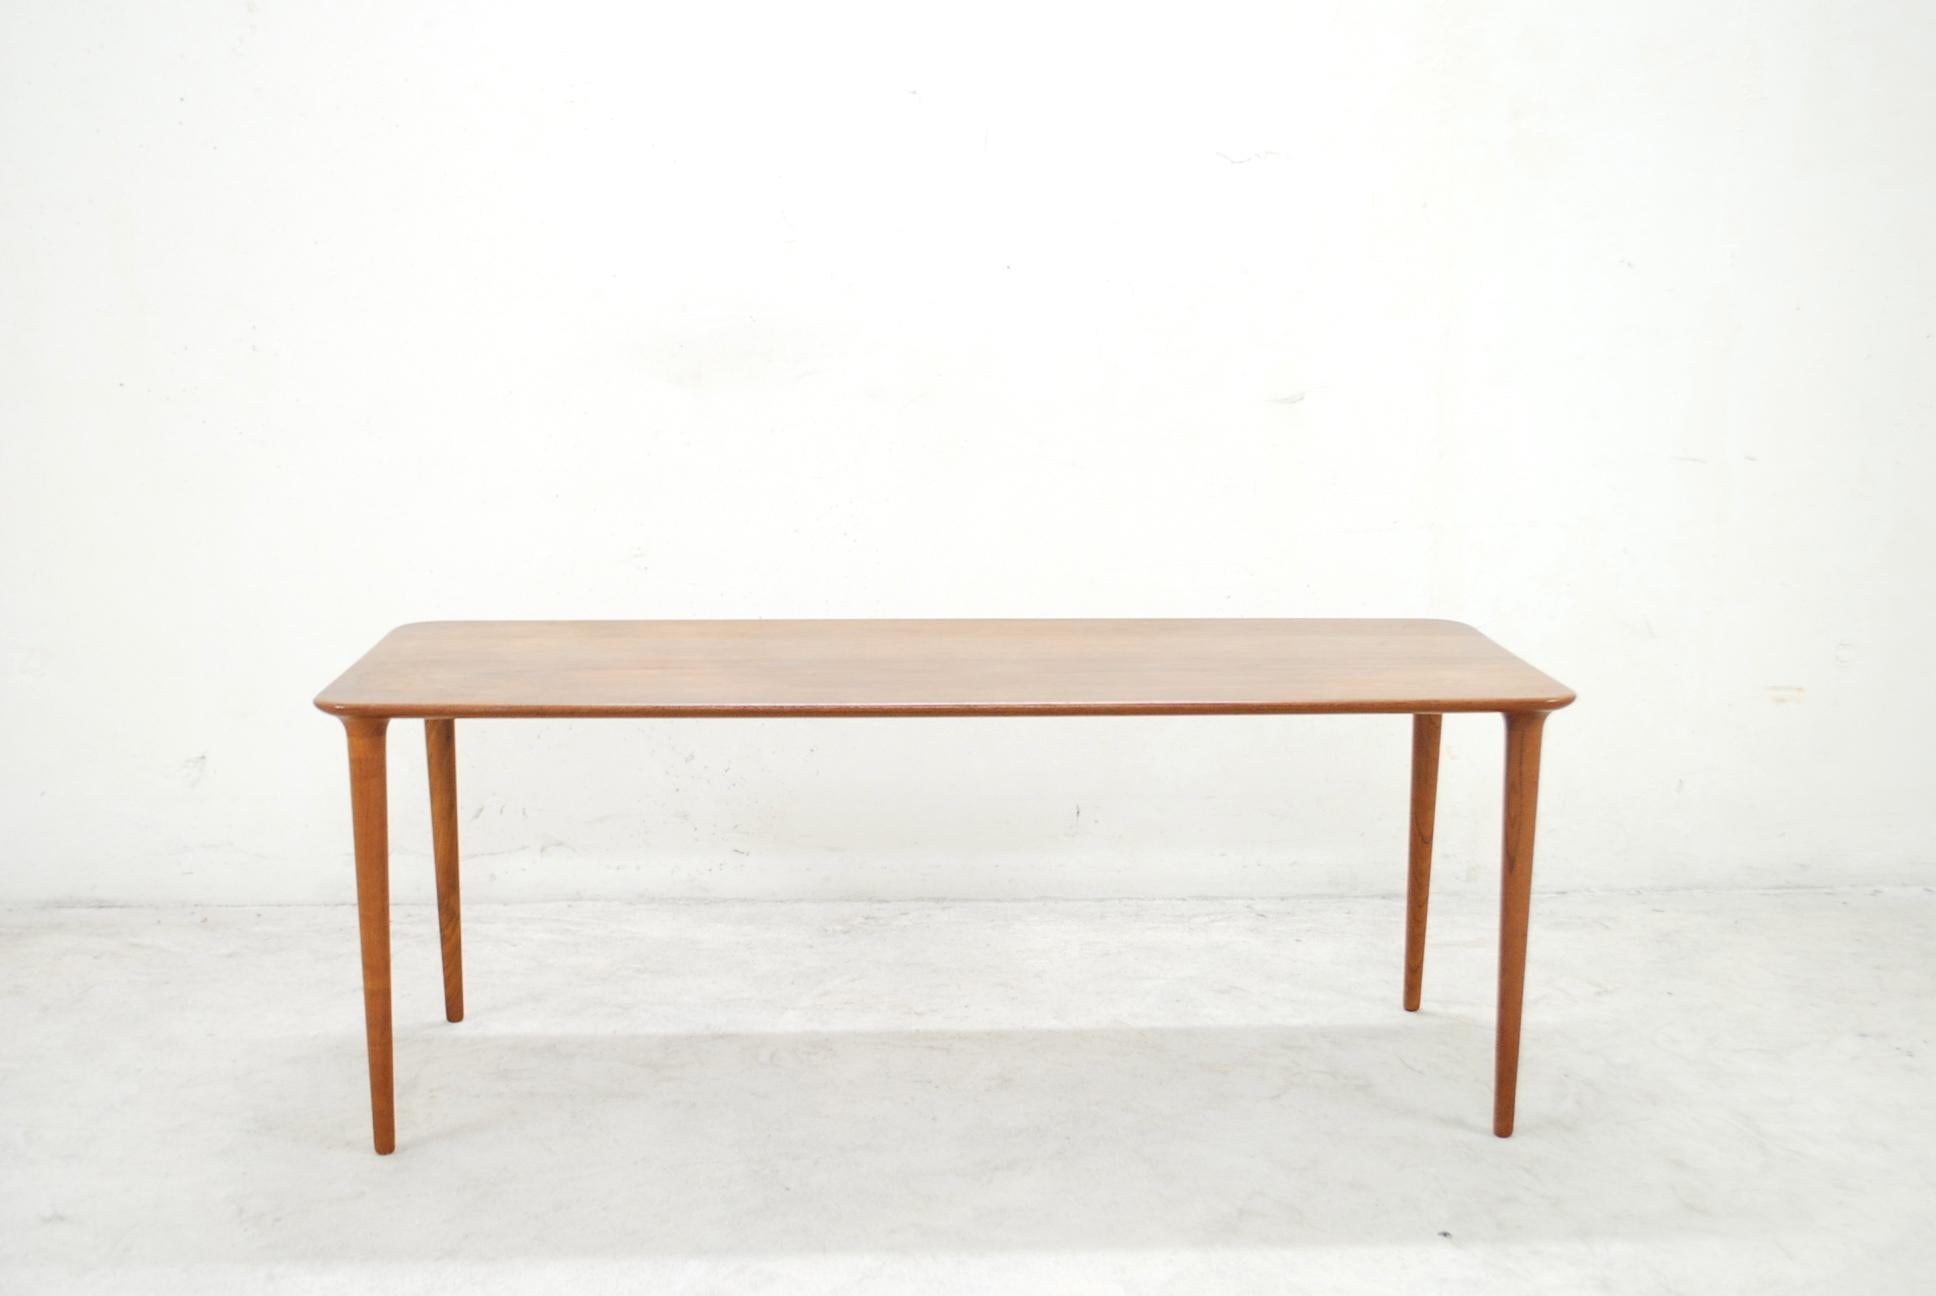 This sculptural coffee table was designed by Rolf Rastad and Adolf Relling for Gustav Bahus and is made of solid teak with removable feet.
A great addition to the Scandinavian modern living room set.